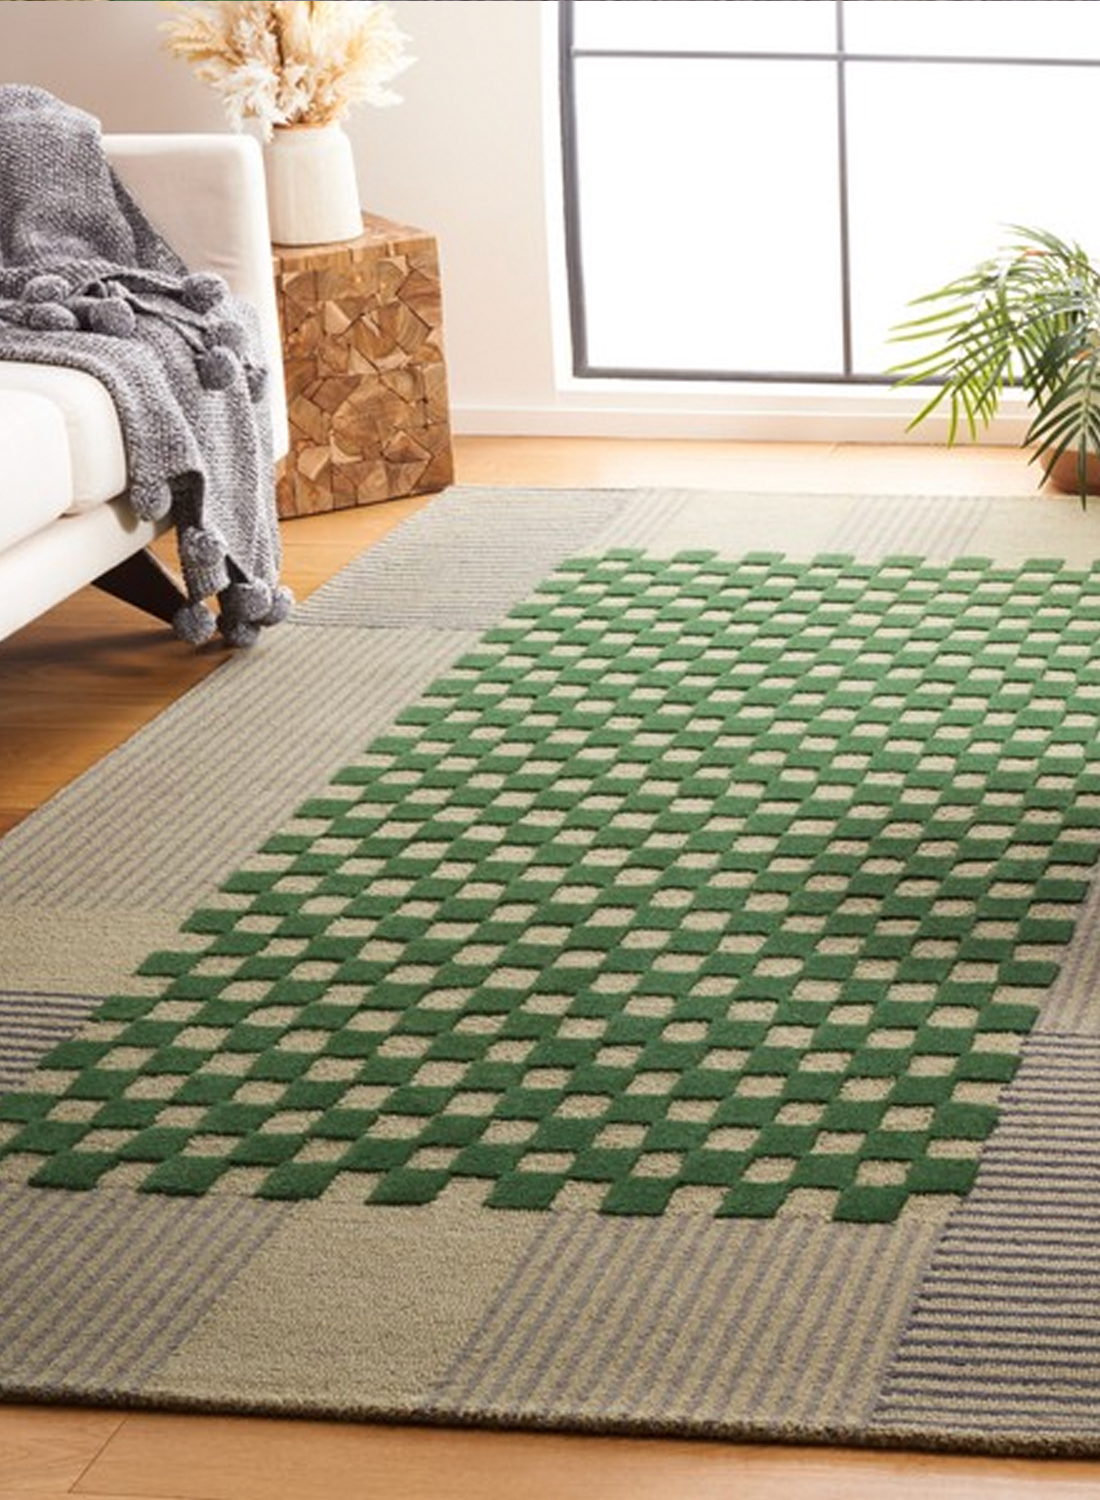 Field Checkered Rug